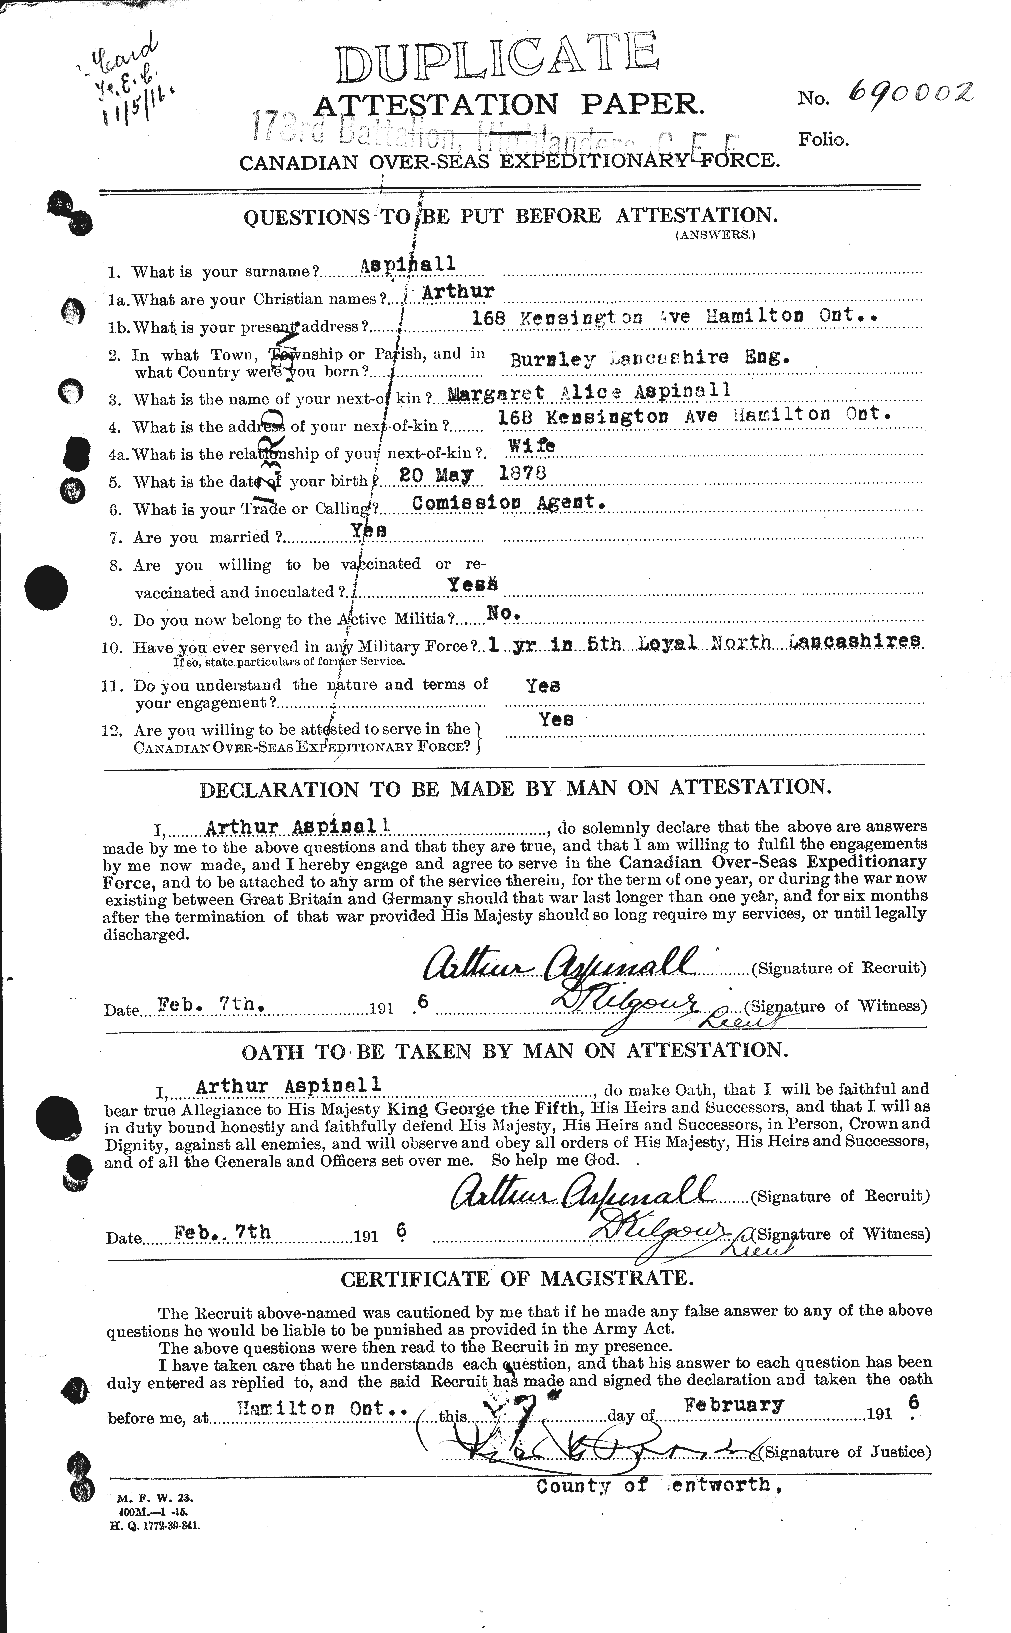 Personnel Records of the First World War - CEF 223576a